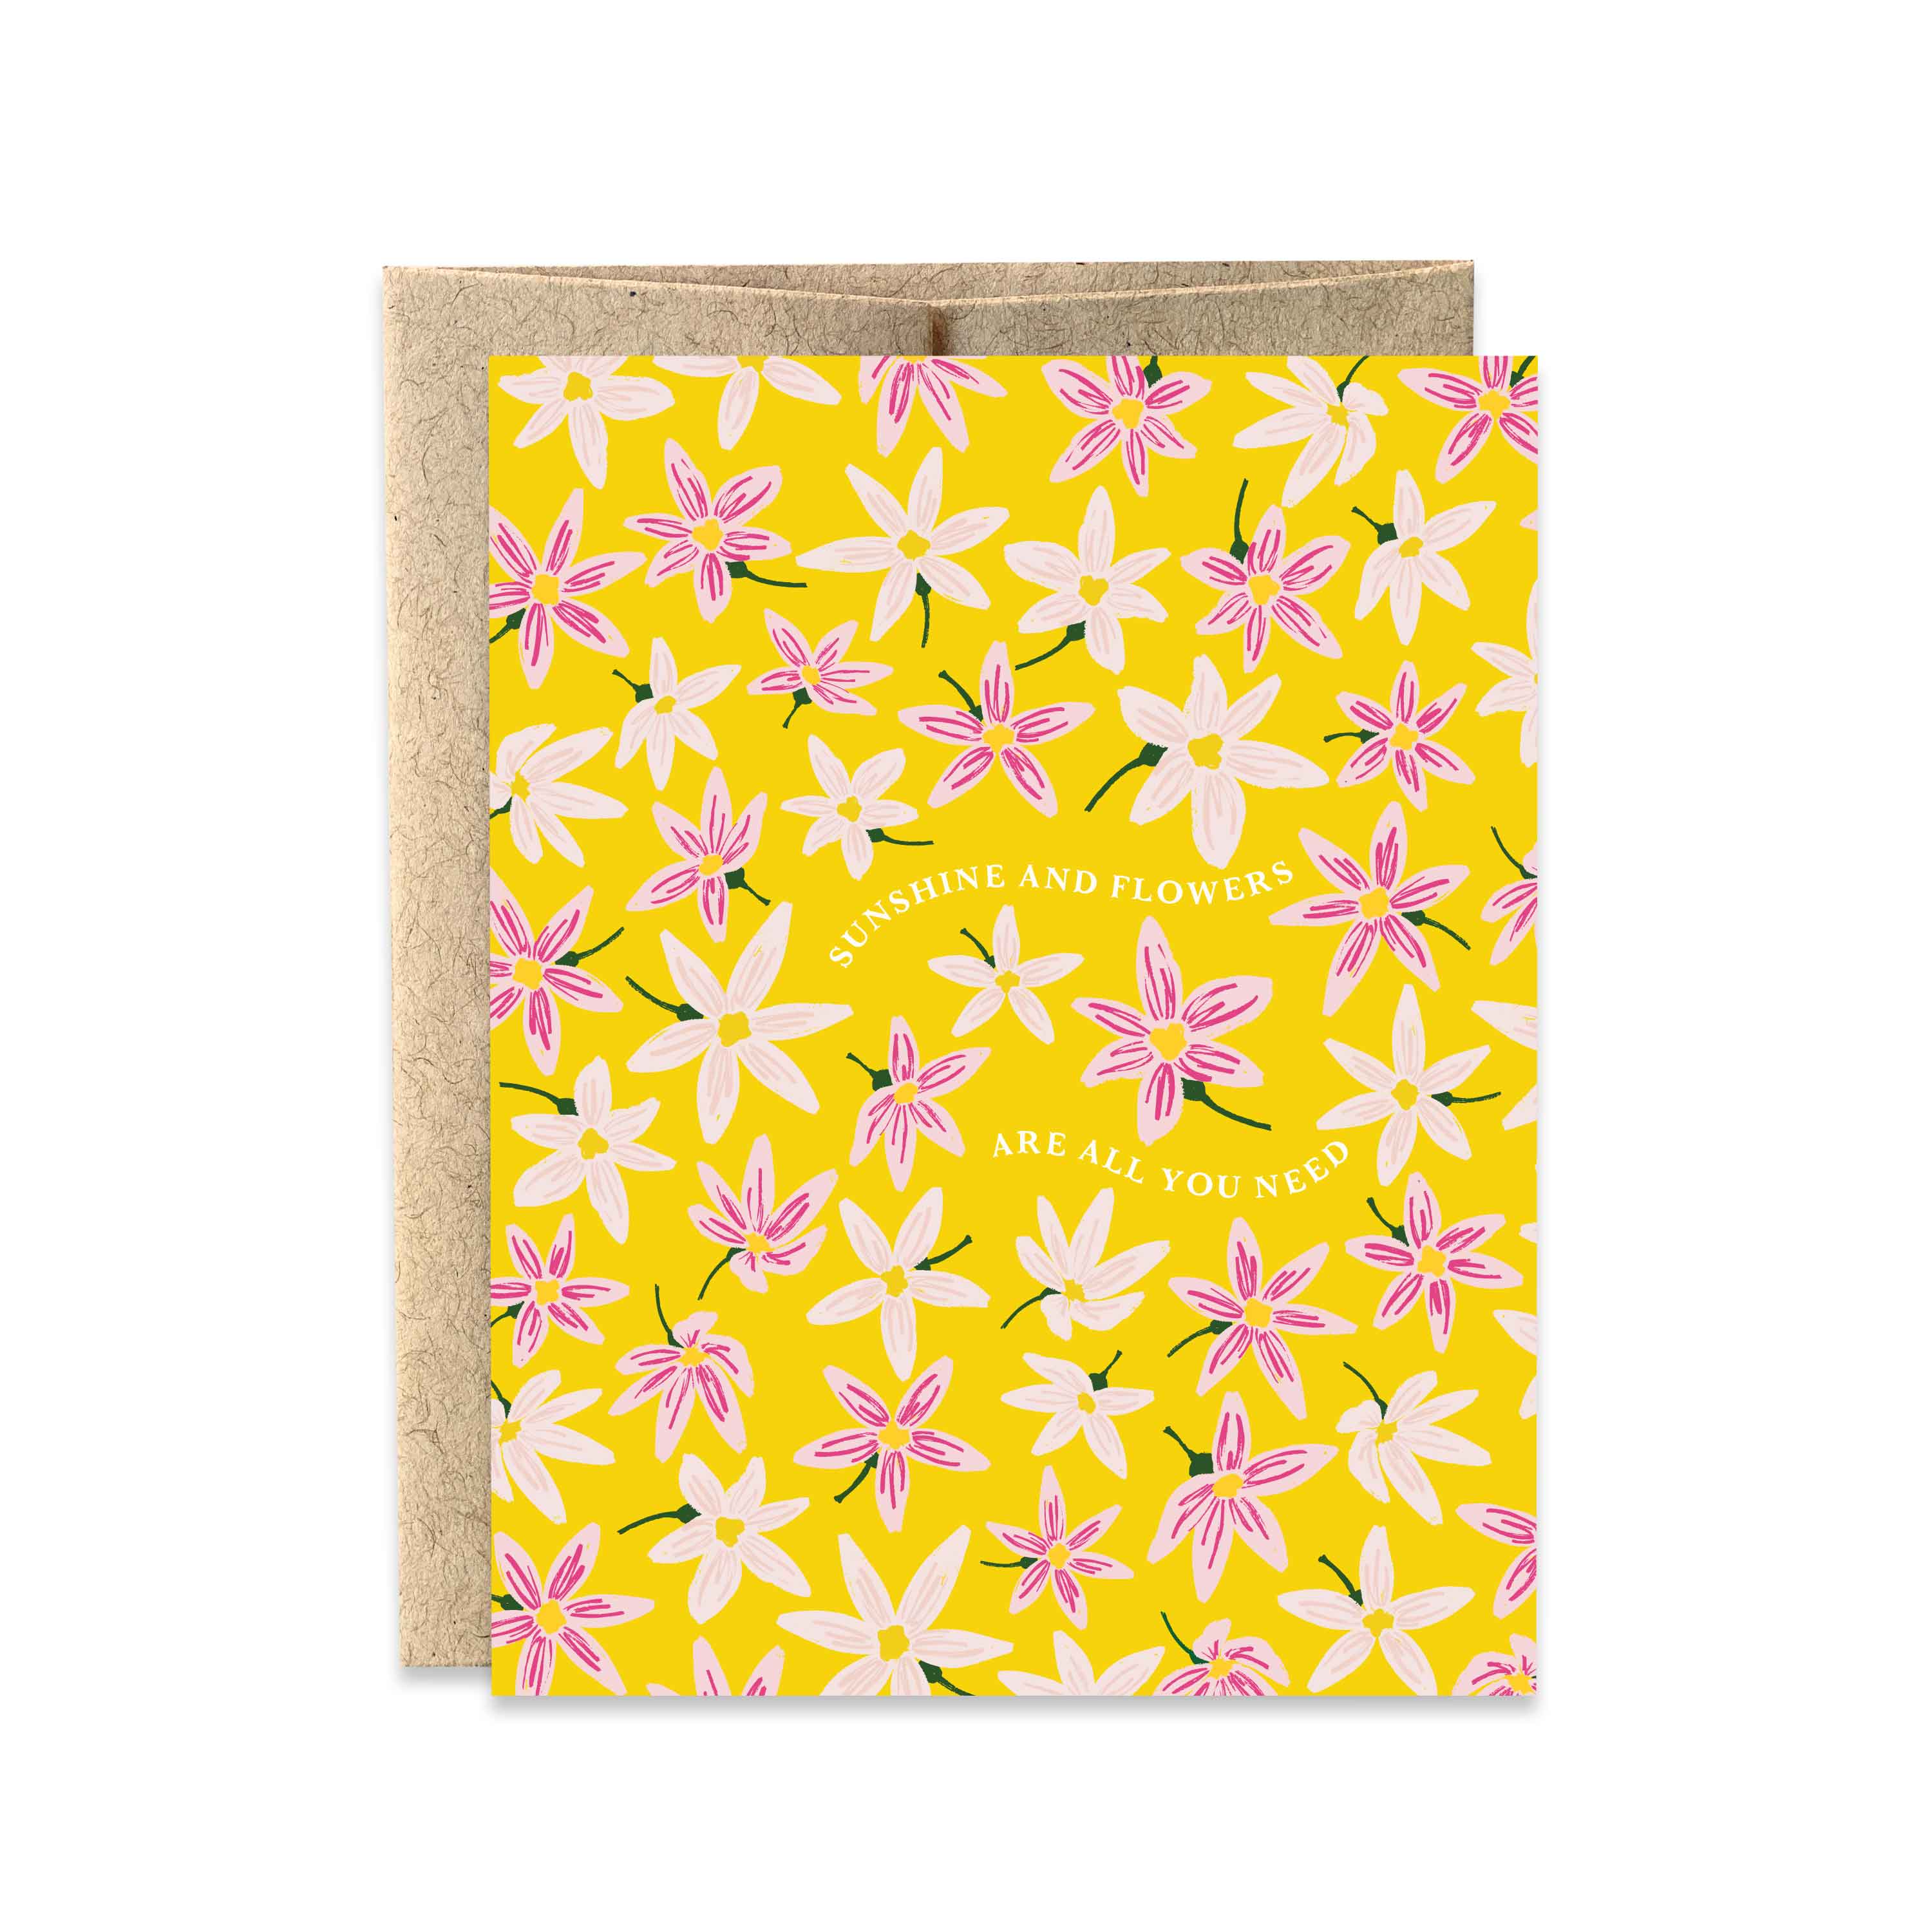 "Sunshine and flowers are all you need" flower garden card